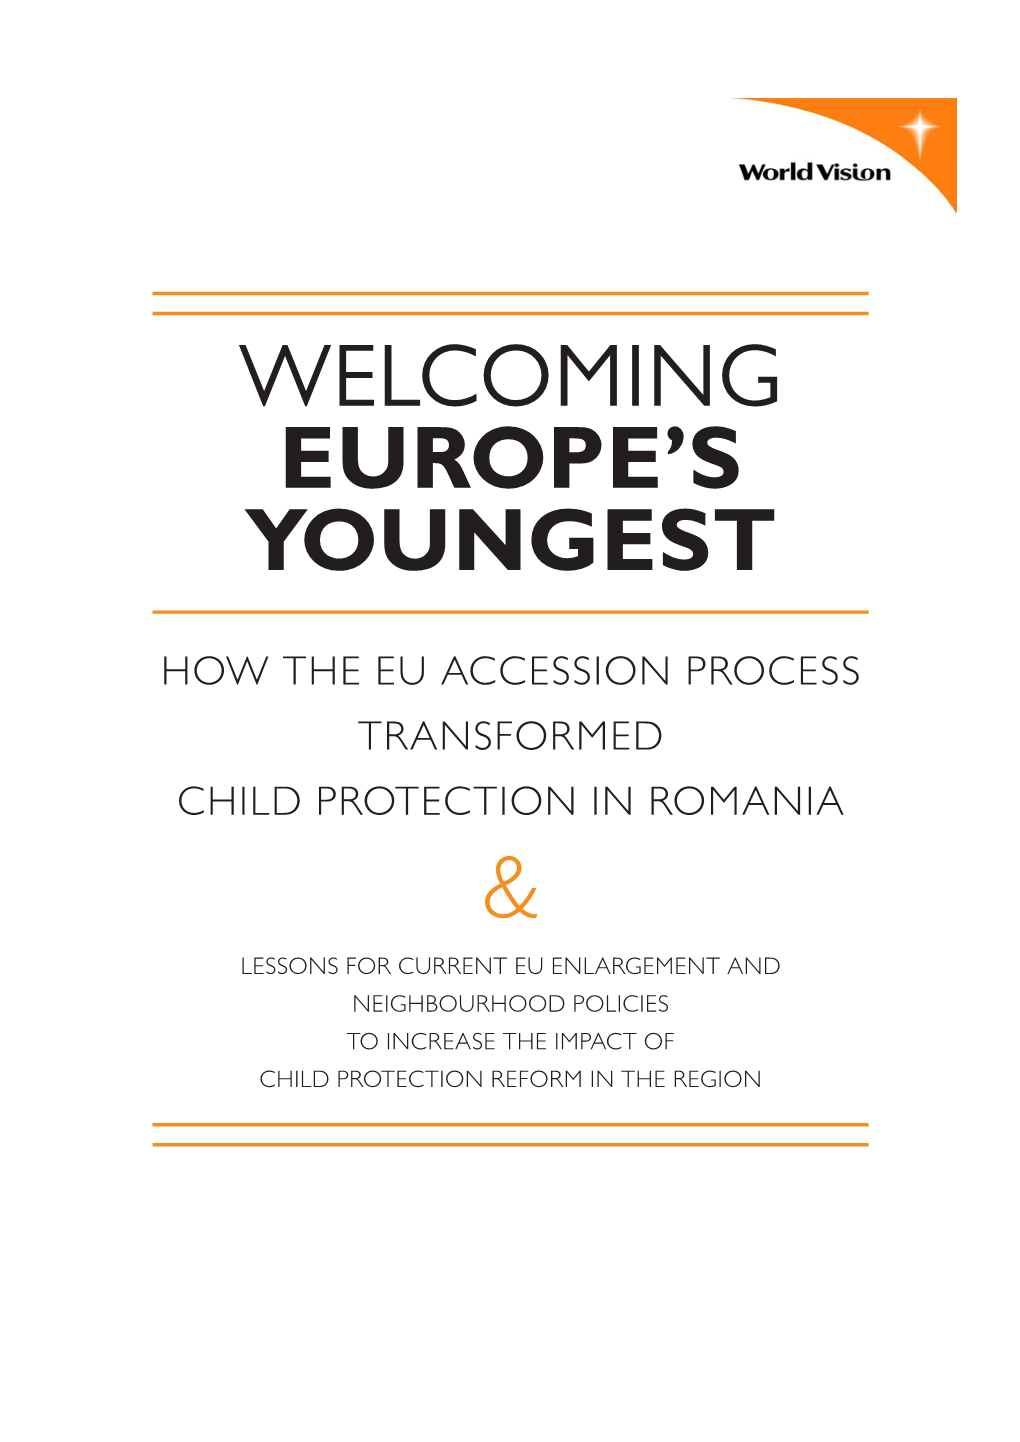 Welcoming Europe's Youngest &